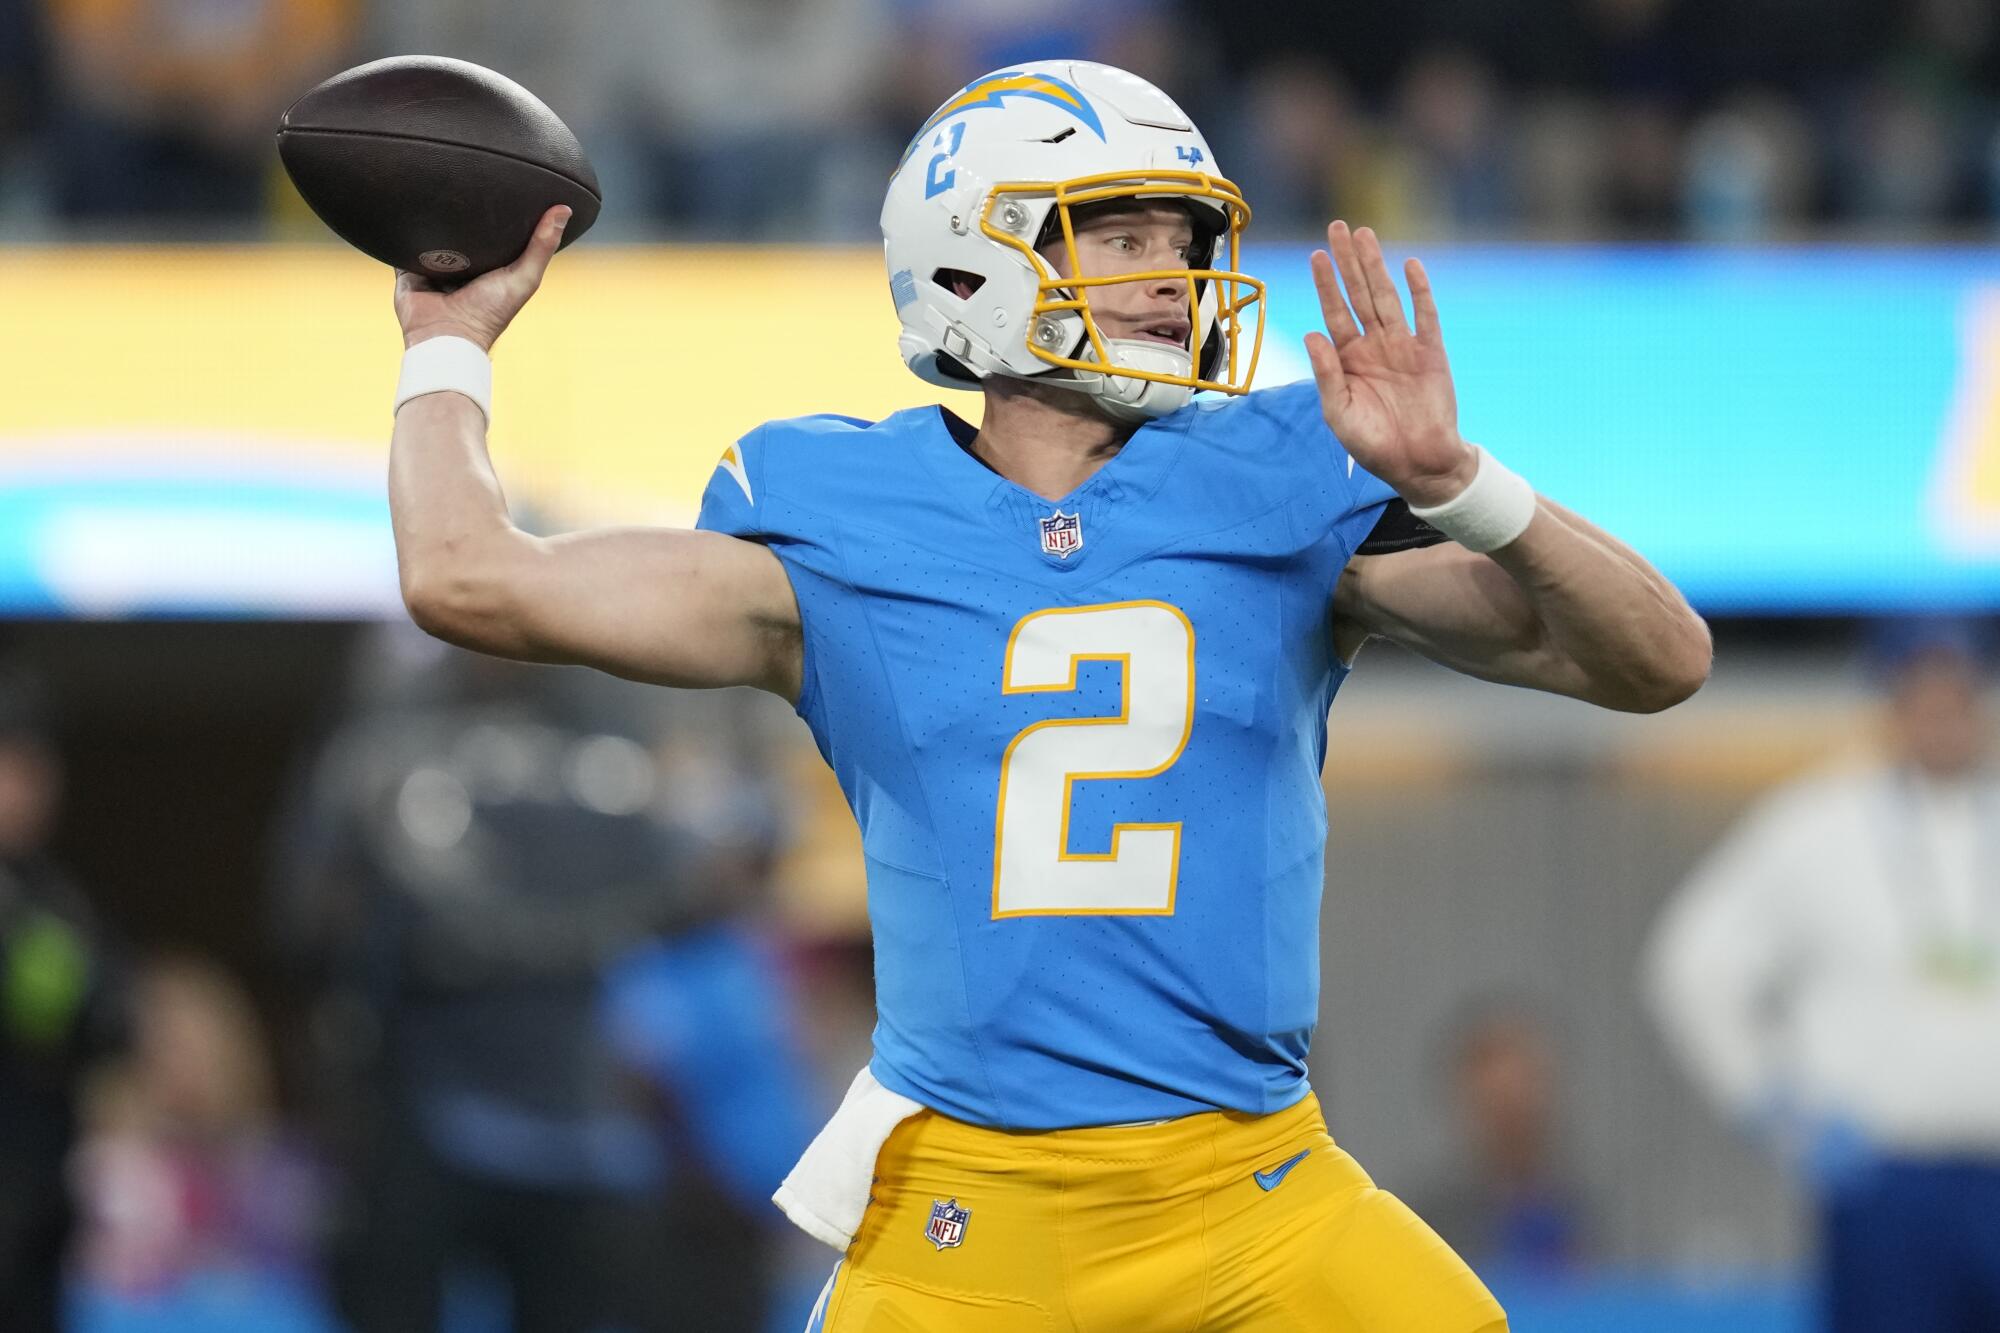 Chargers quarterback Easton Stick passes against the Buffalo Bills in the first quarter Saturday at SoFi Stadium.